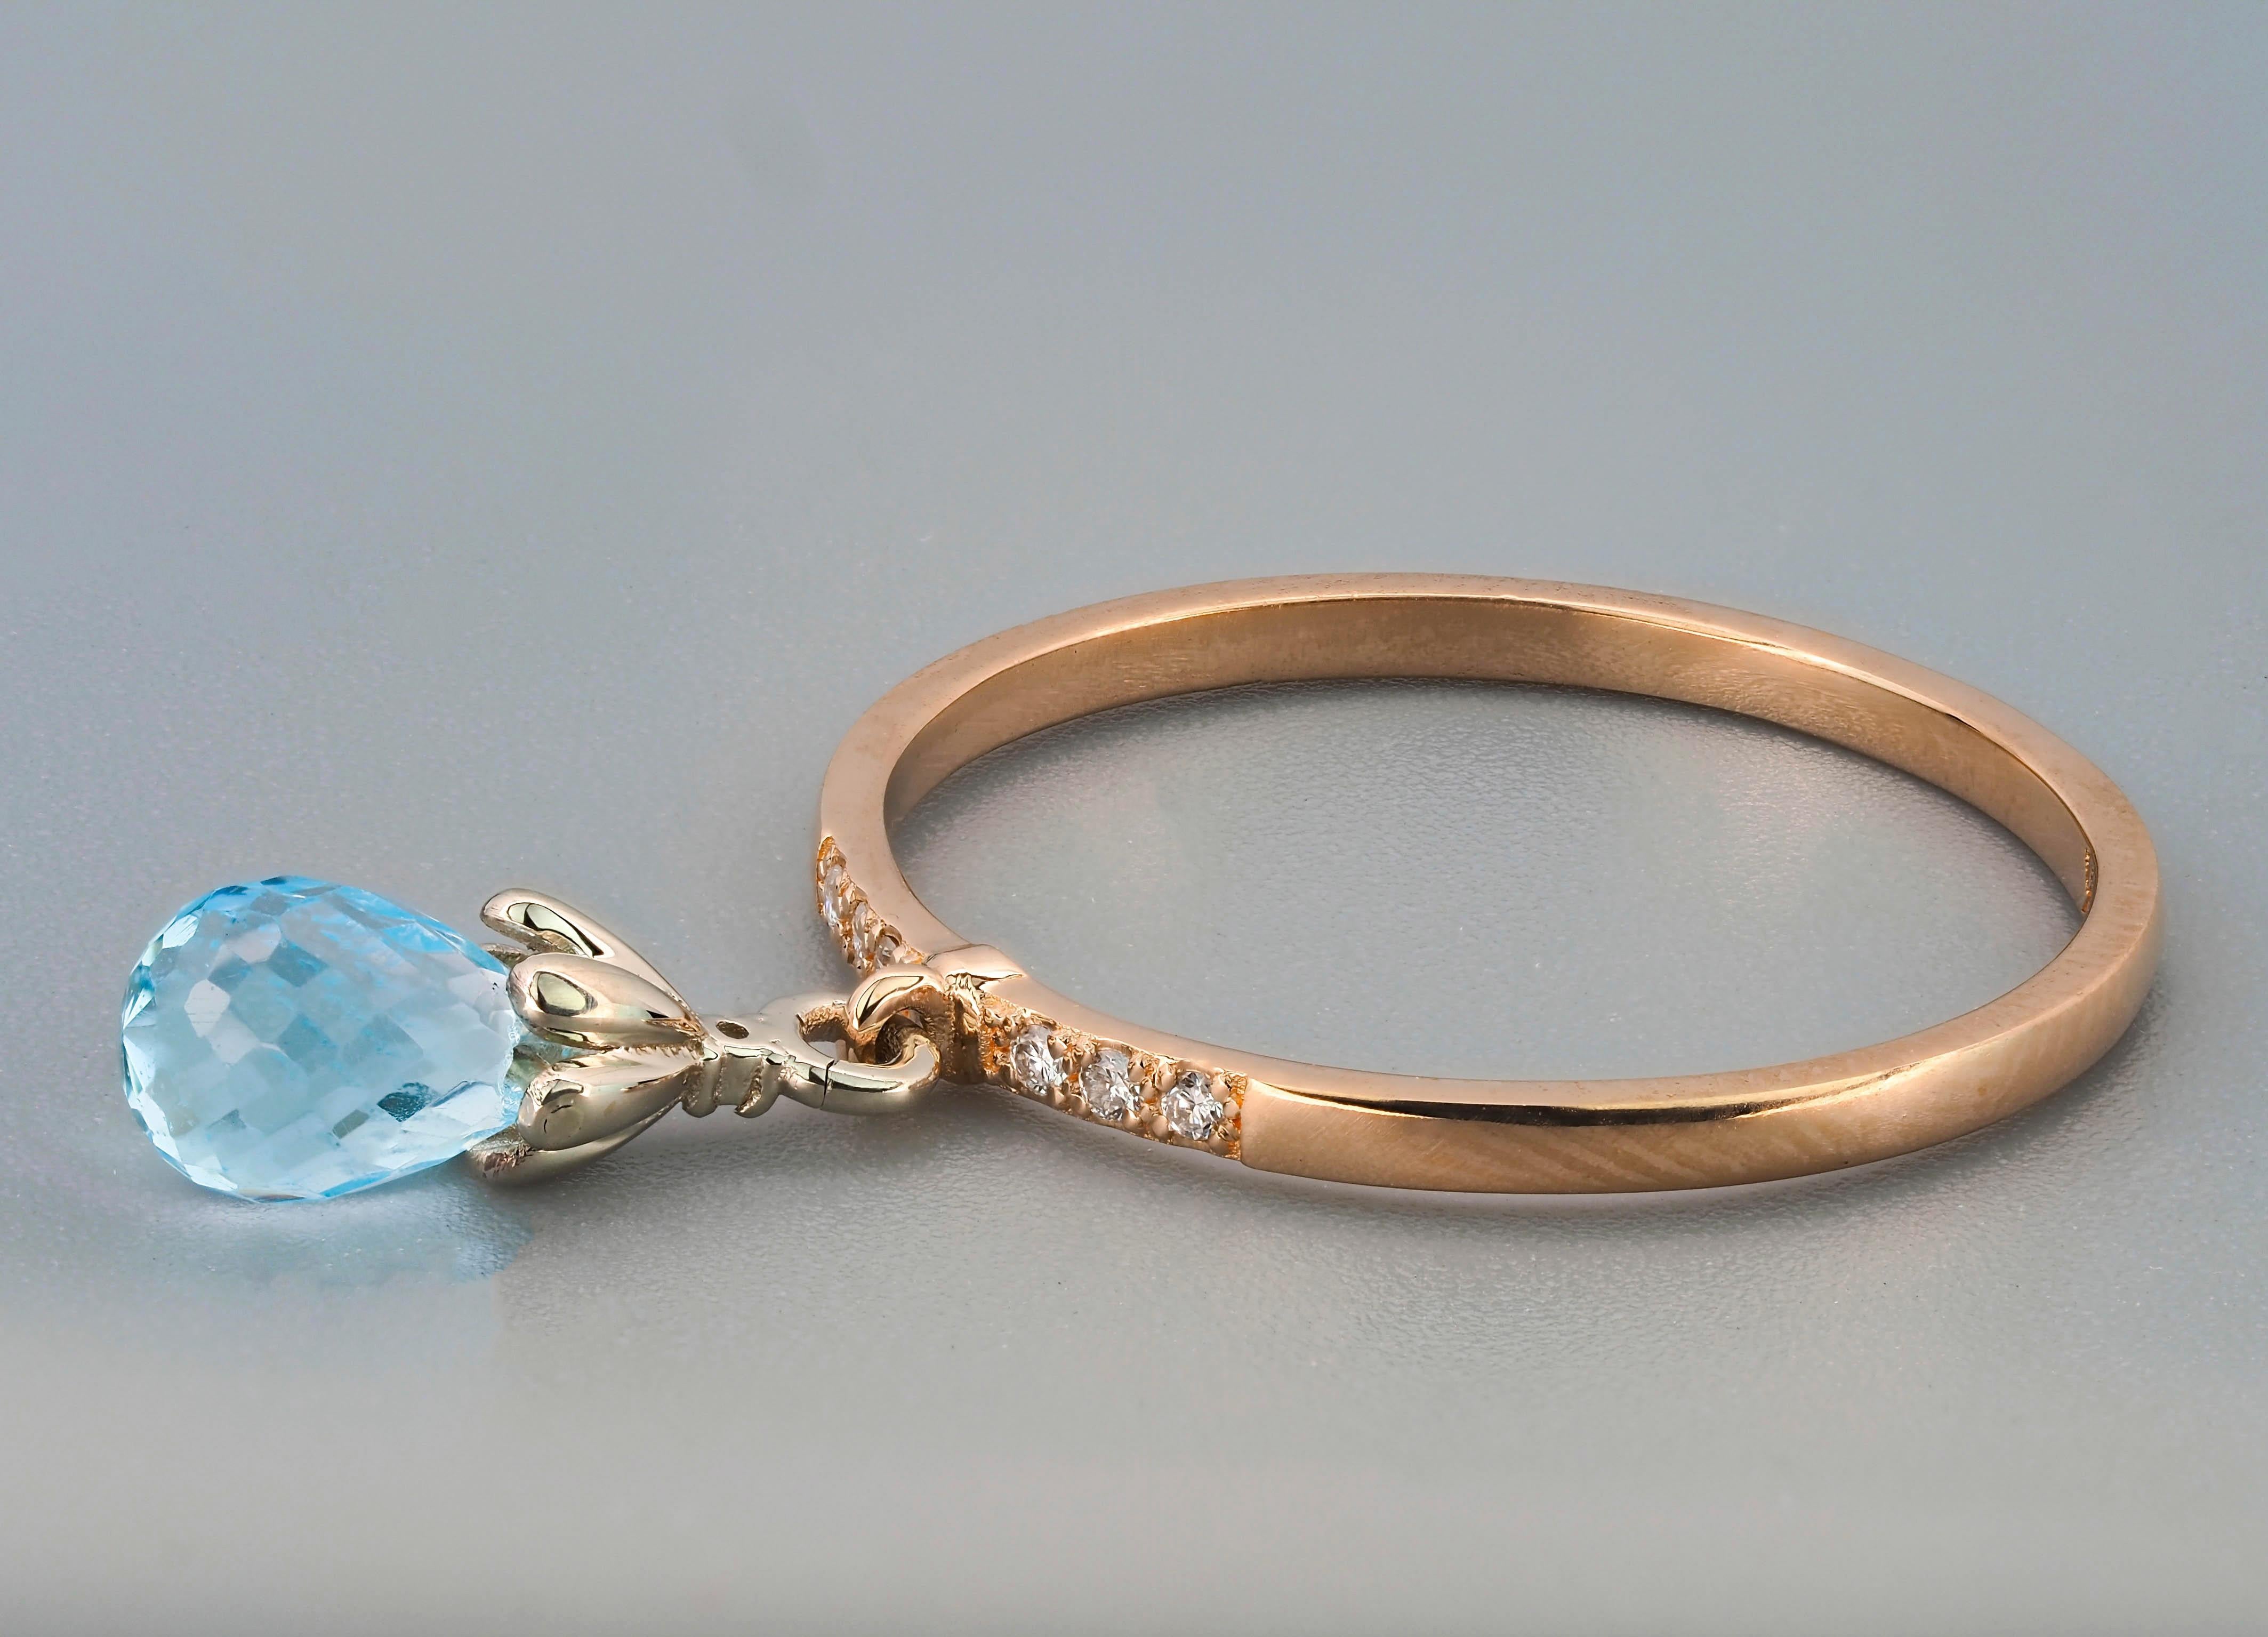 For Sale:  14k Gold Ring with Topaz Briolette and Diamonds 7